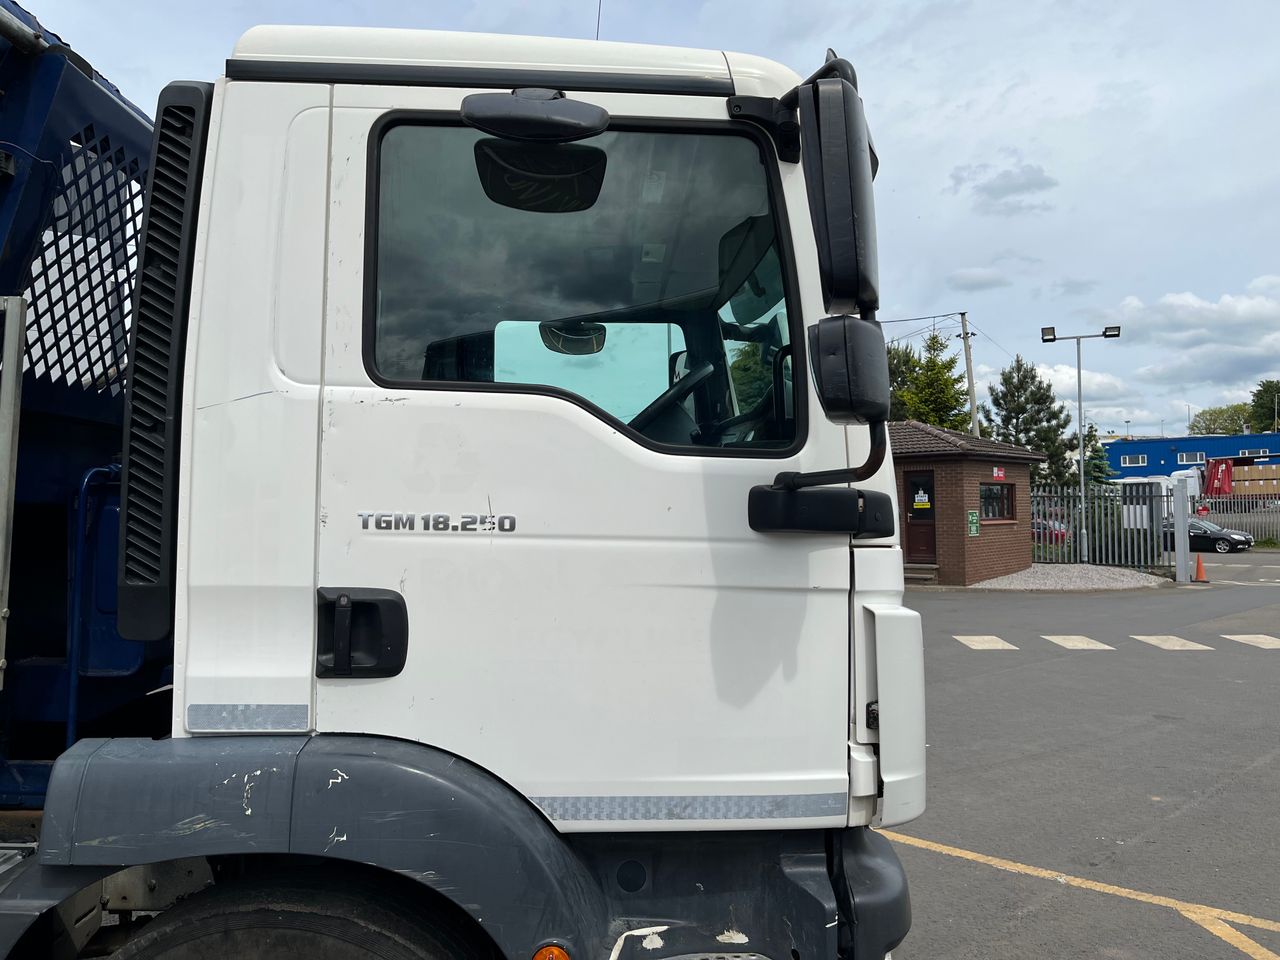 Ready to go MAN TGM 18.250, Skip Loader, 250, 18 Tonne, Day Cab, 8-Speed Manual Gearbox, Hyva Gear, Front Strobes, FORS - Gold Kit fitted, 2 Seats in Cab, Cab Sunvisor , , Hyva , PK 88002 EH HIGH PERFORMANCE | for sale at MV Commercial, the UKs leading Truck, Trailers and Van supplier. (RK65EOF 84997)